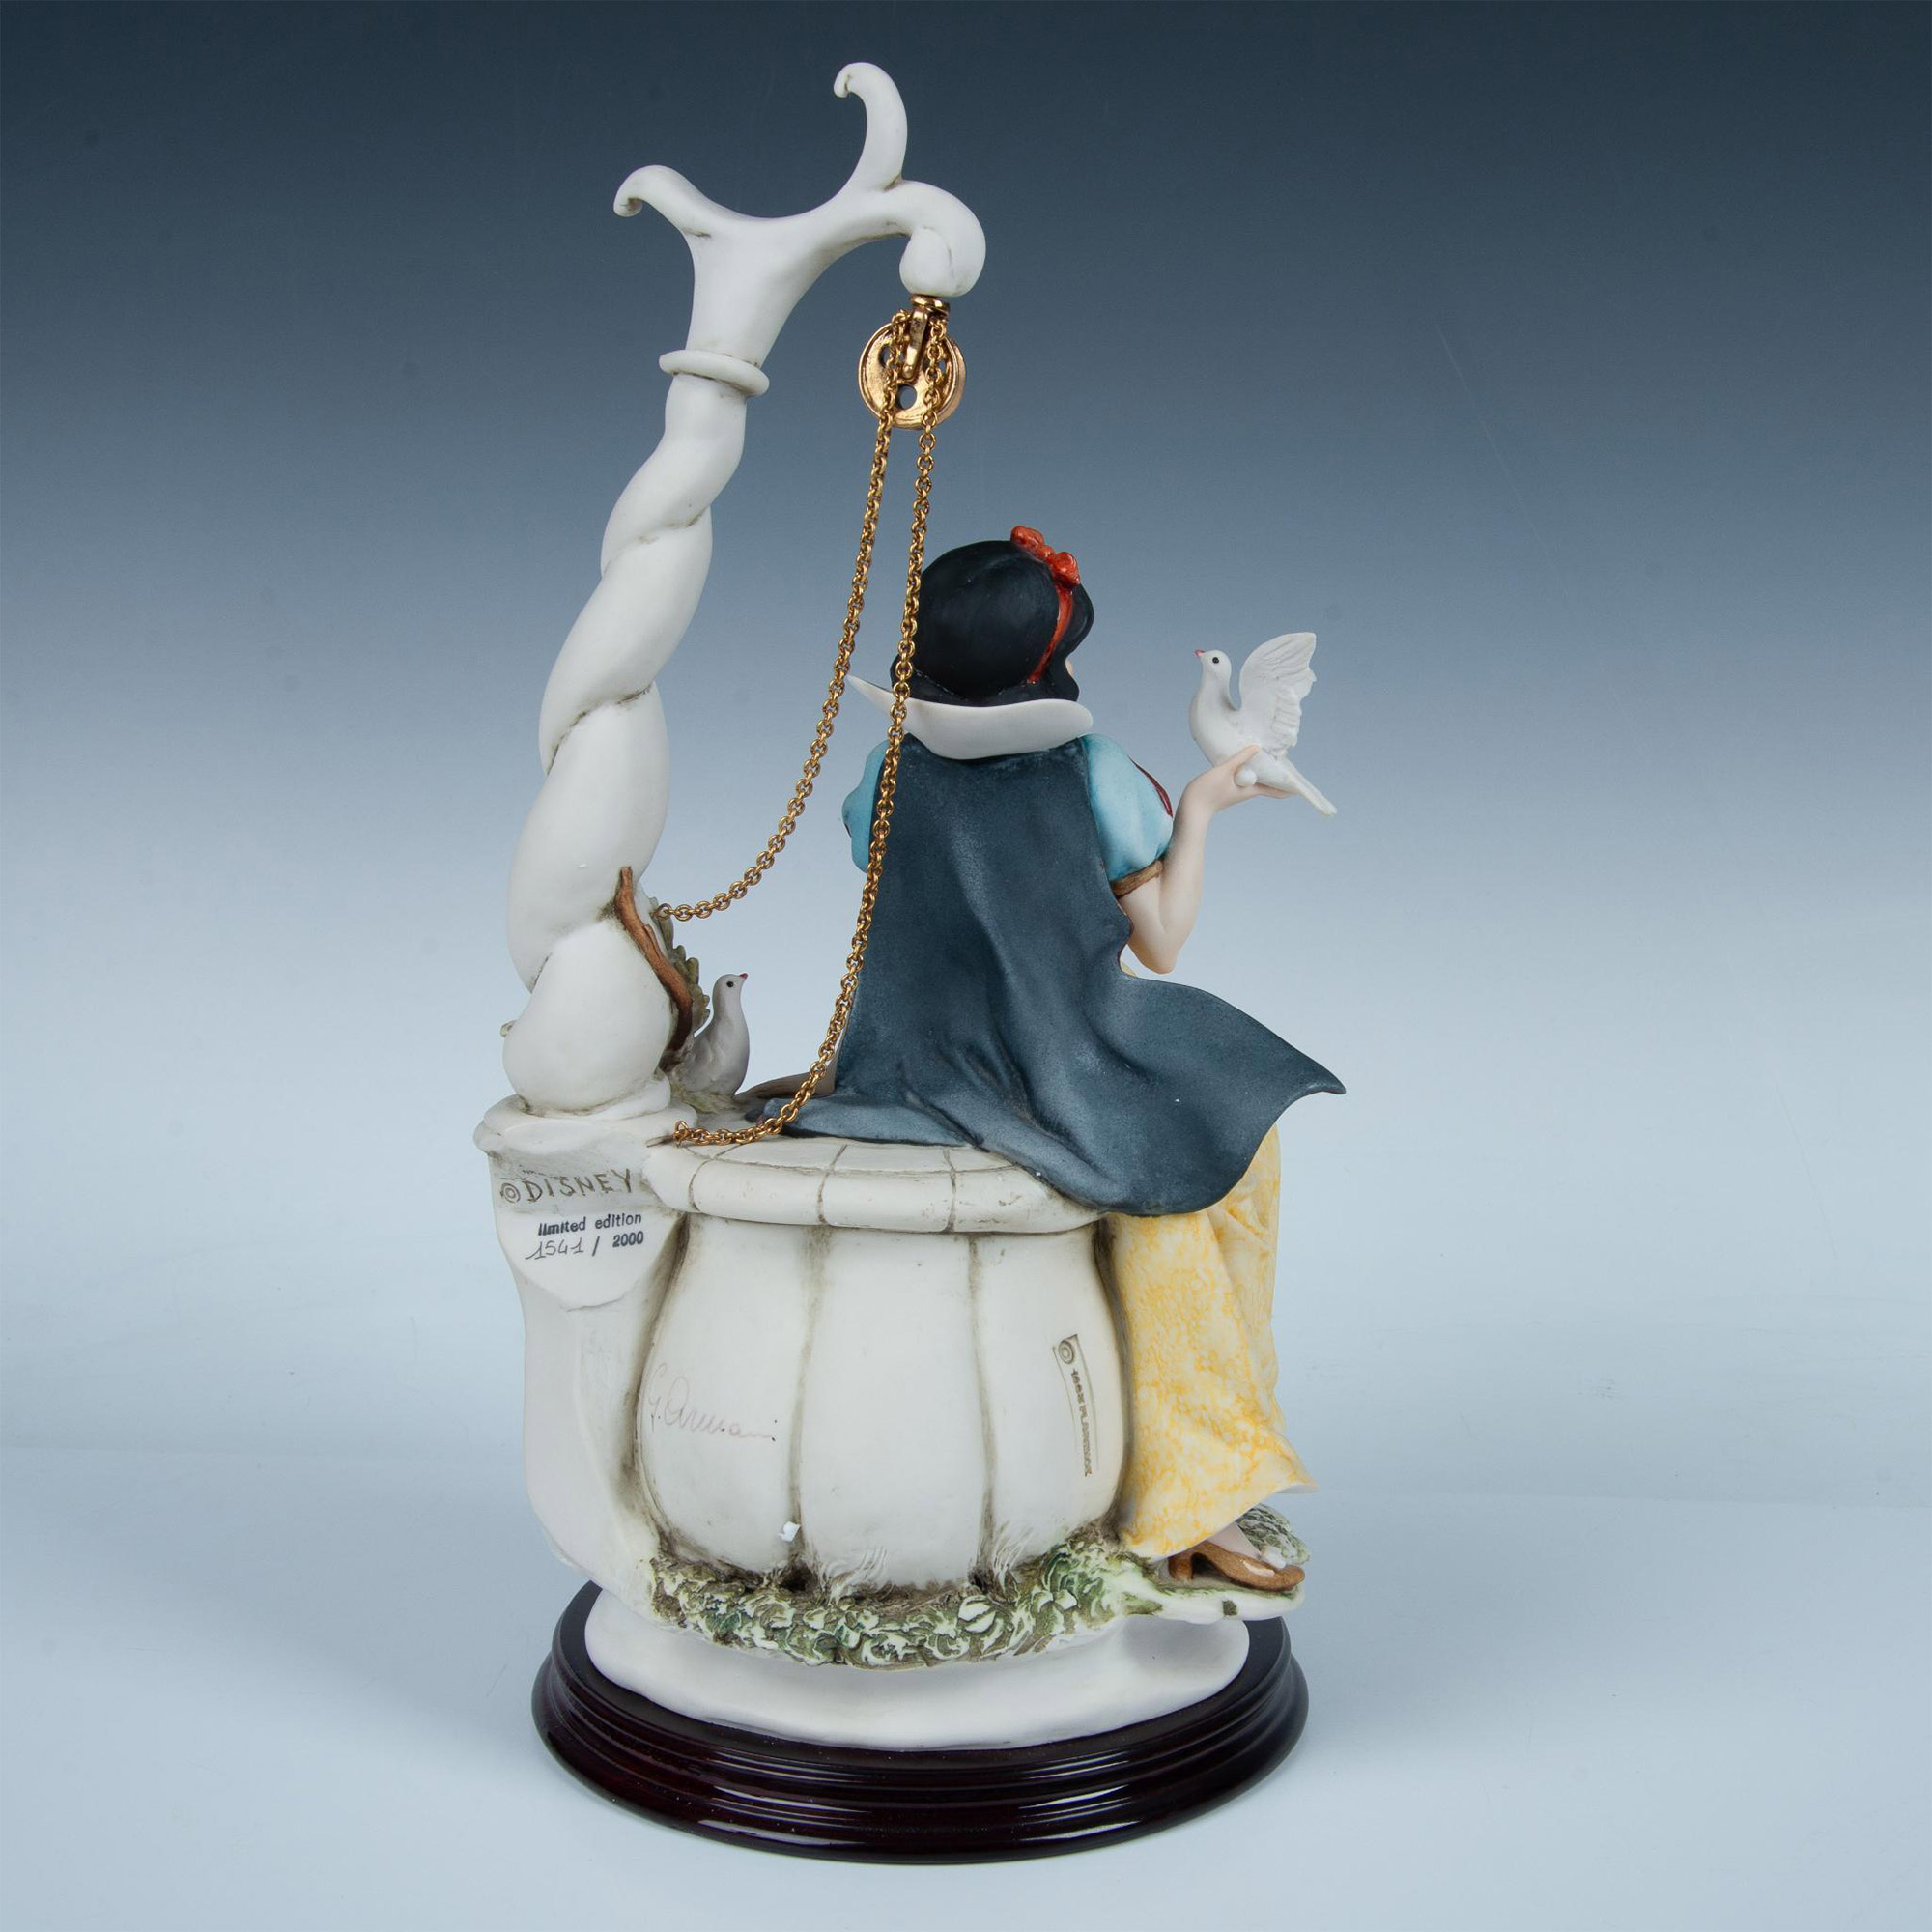 Florence by Giuseppe Armani for Disney Figurine, Snow White - Image 8 of 13